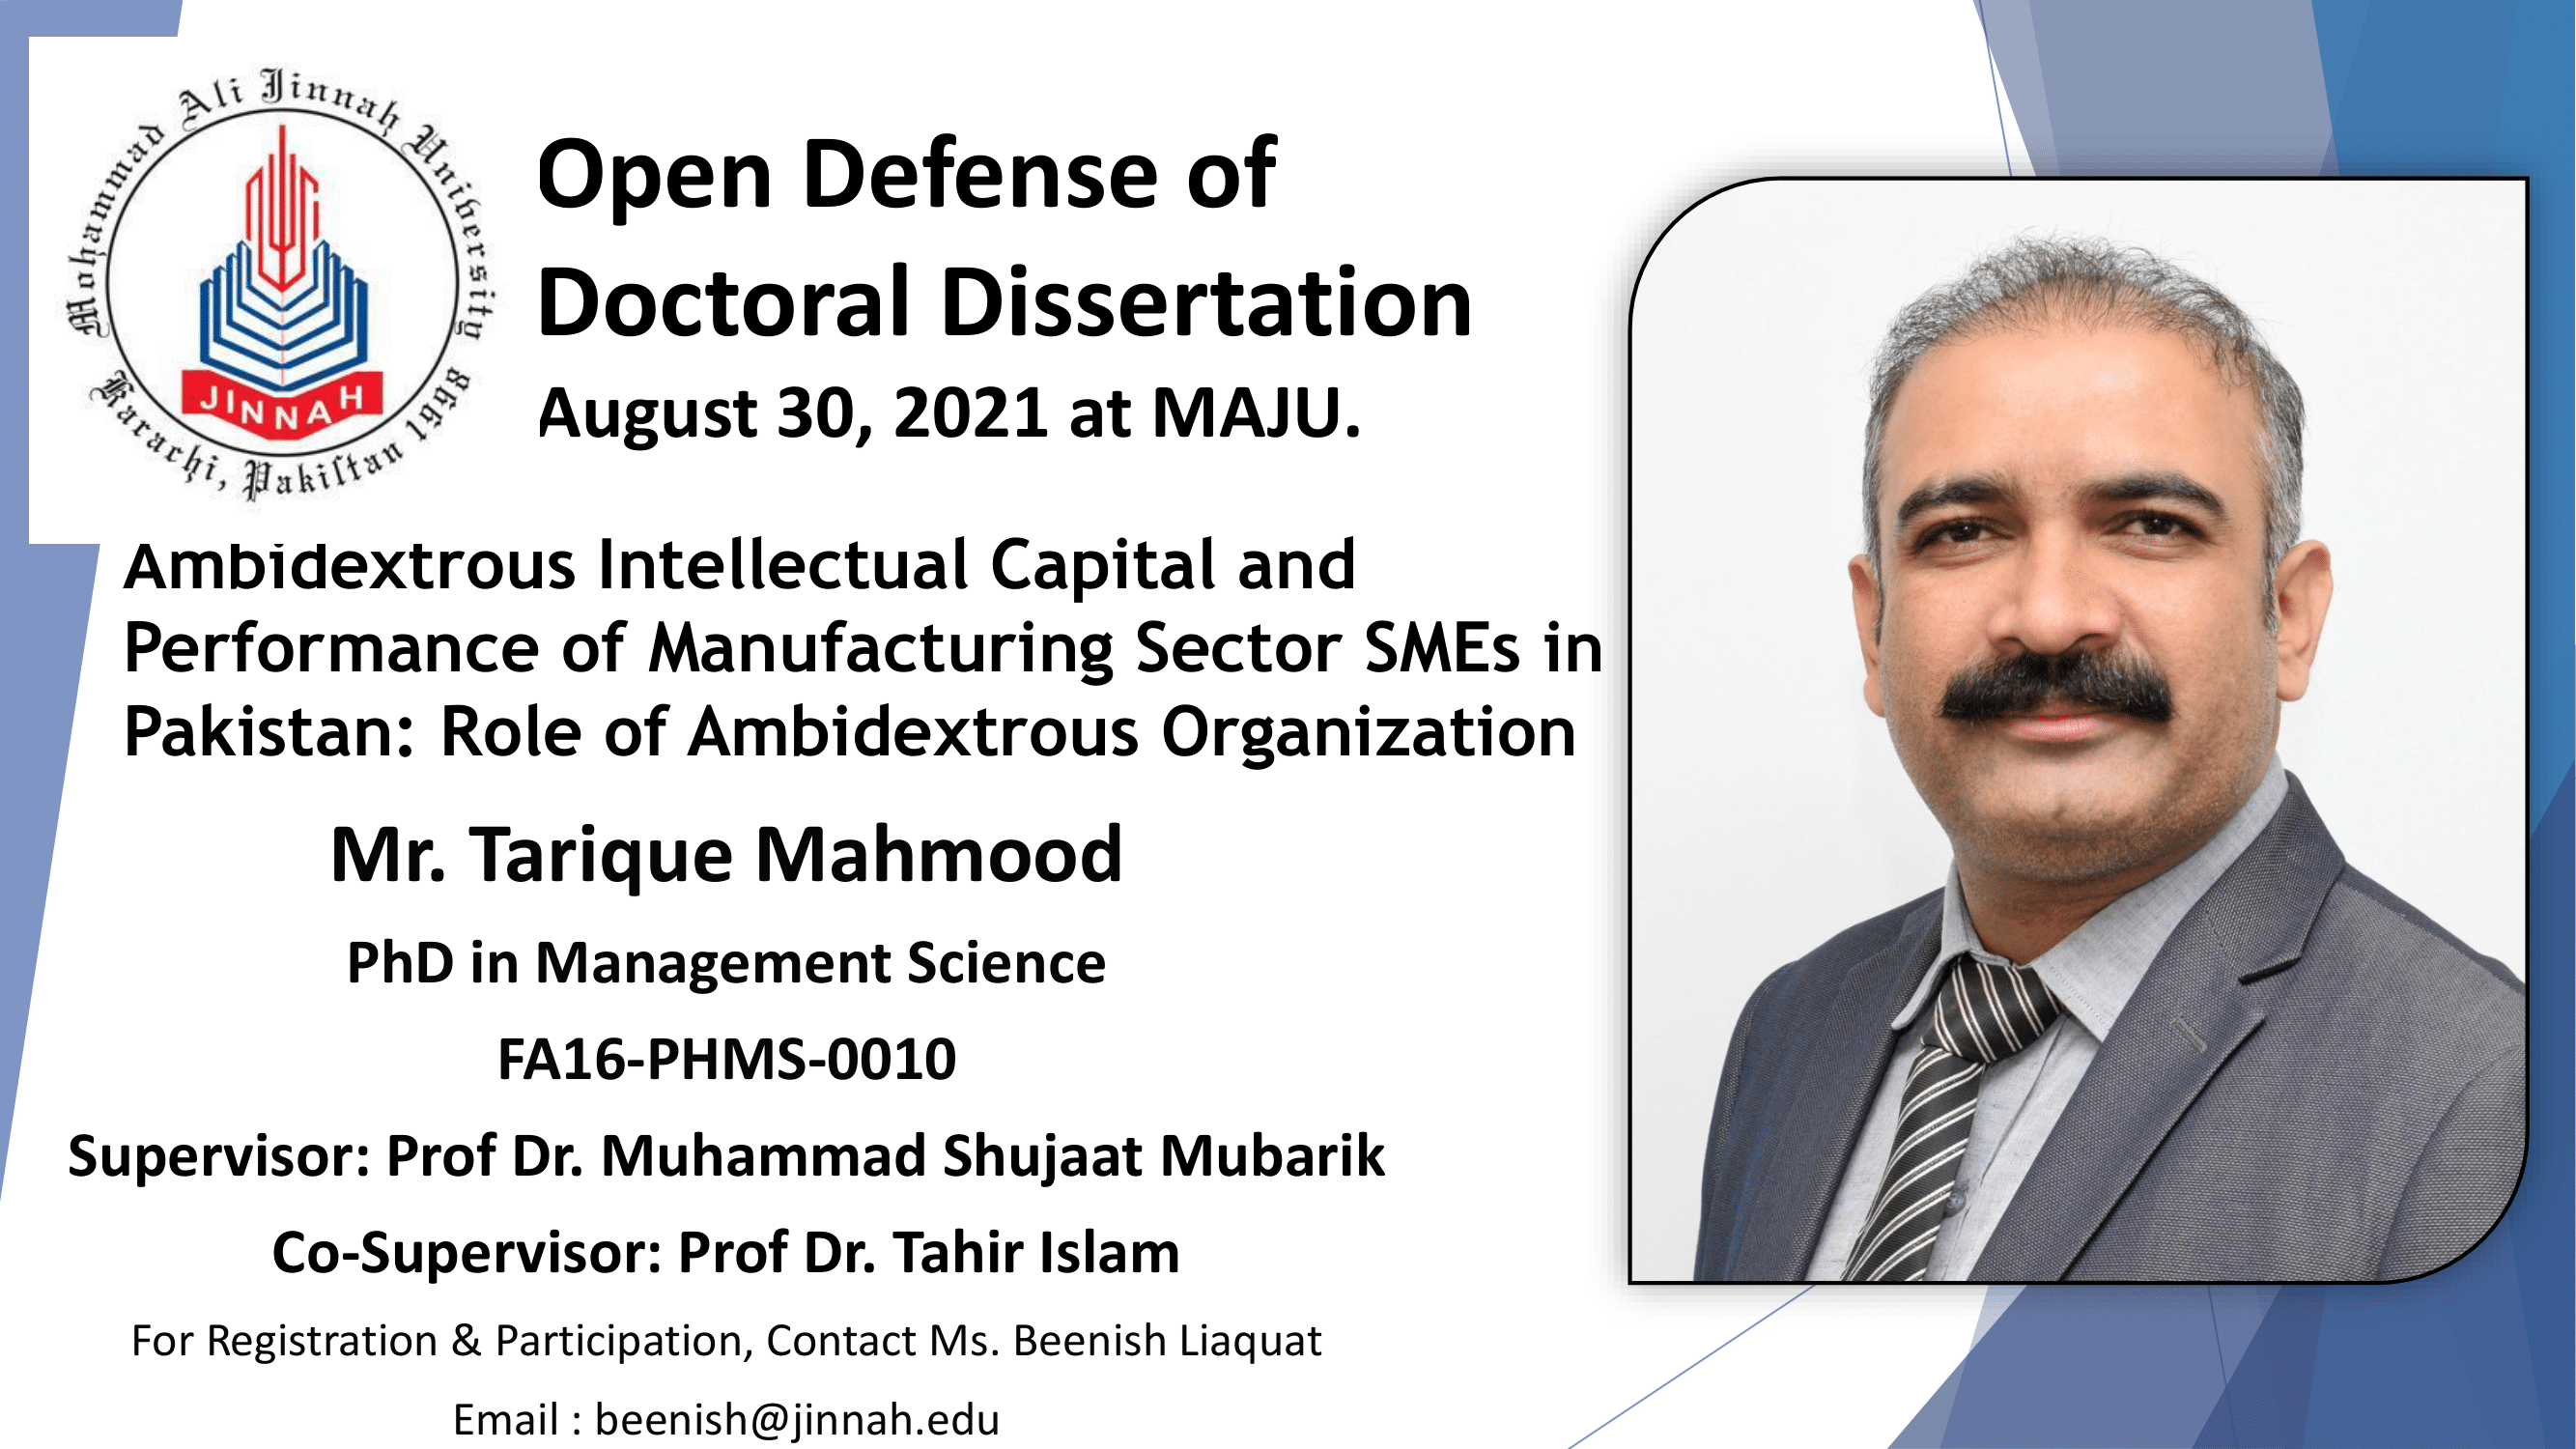 Open Defense of Doctoral Dissertation, August 30, 2021 at MAJU